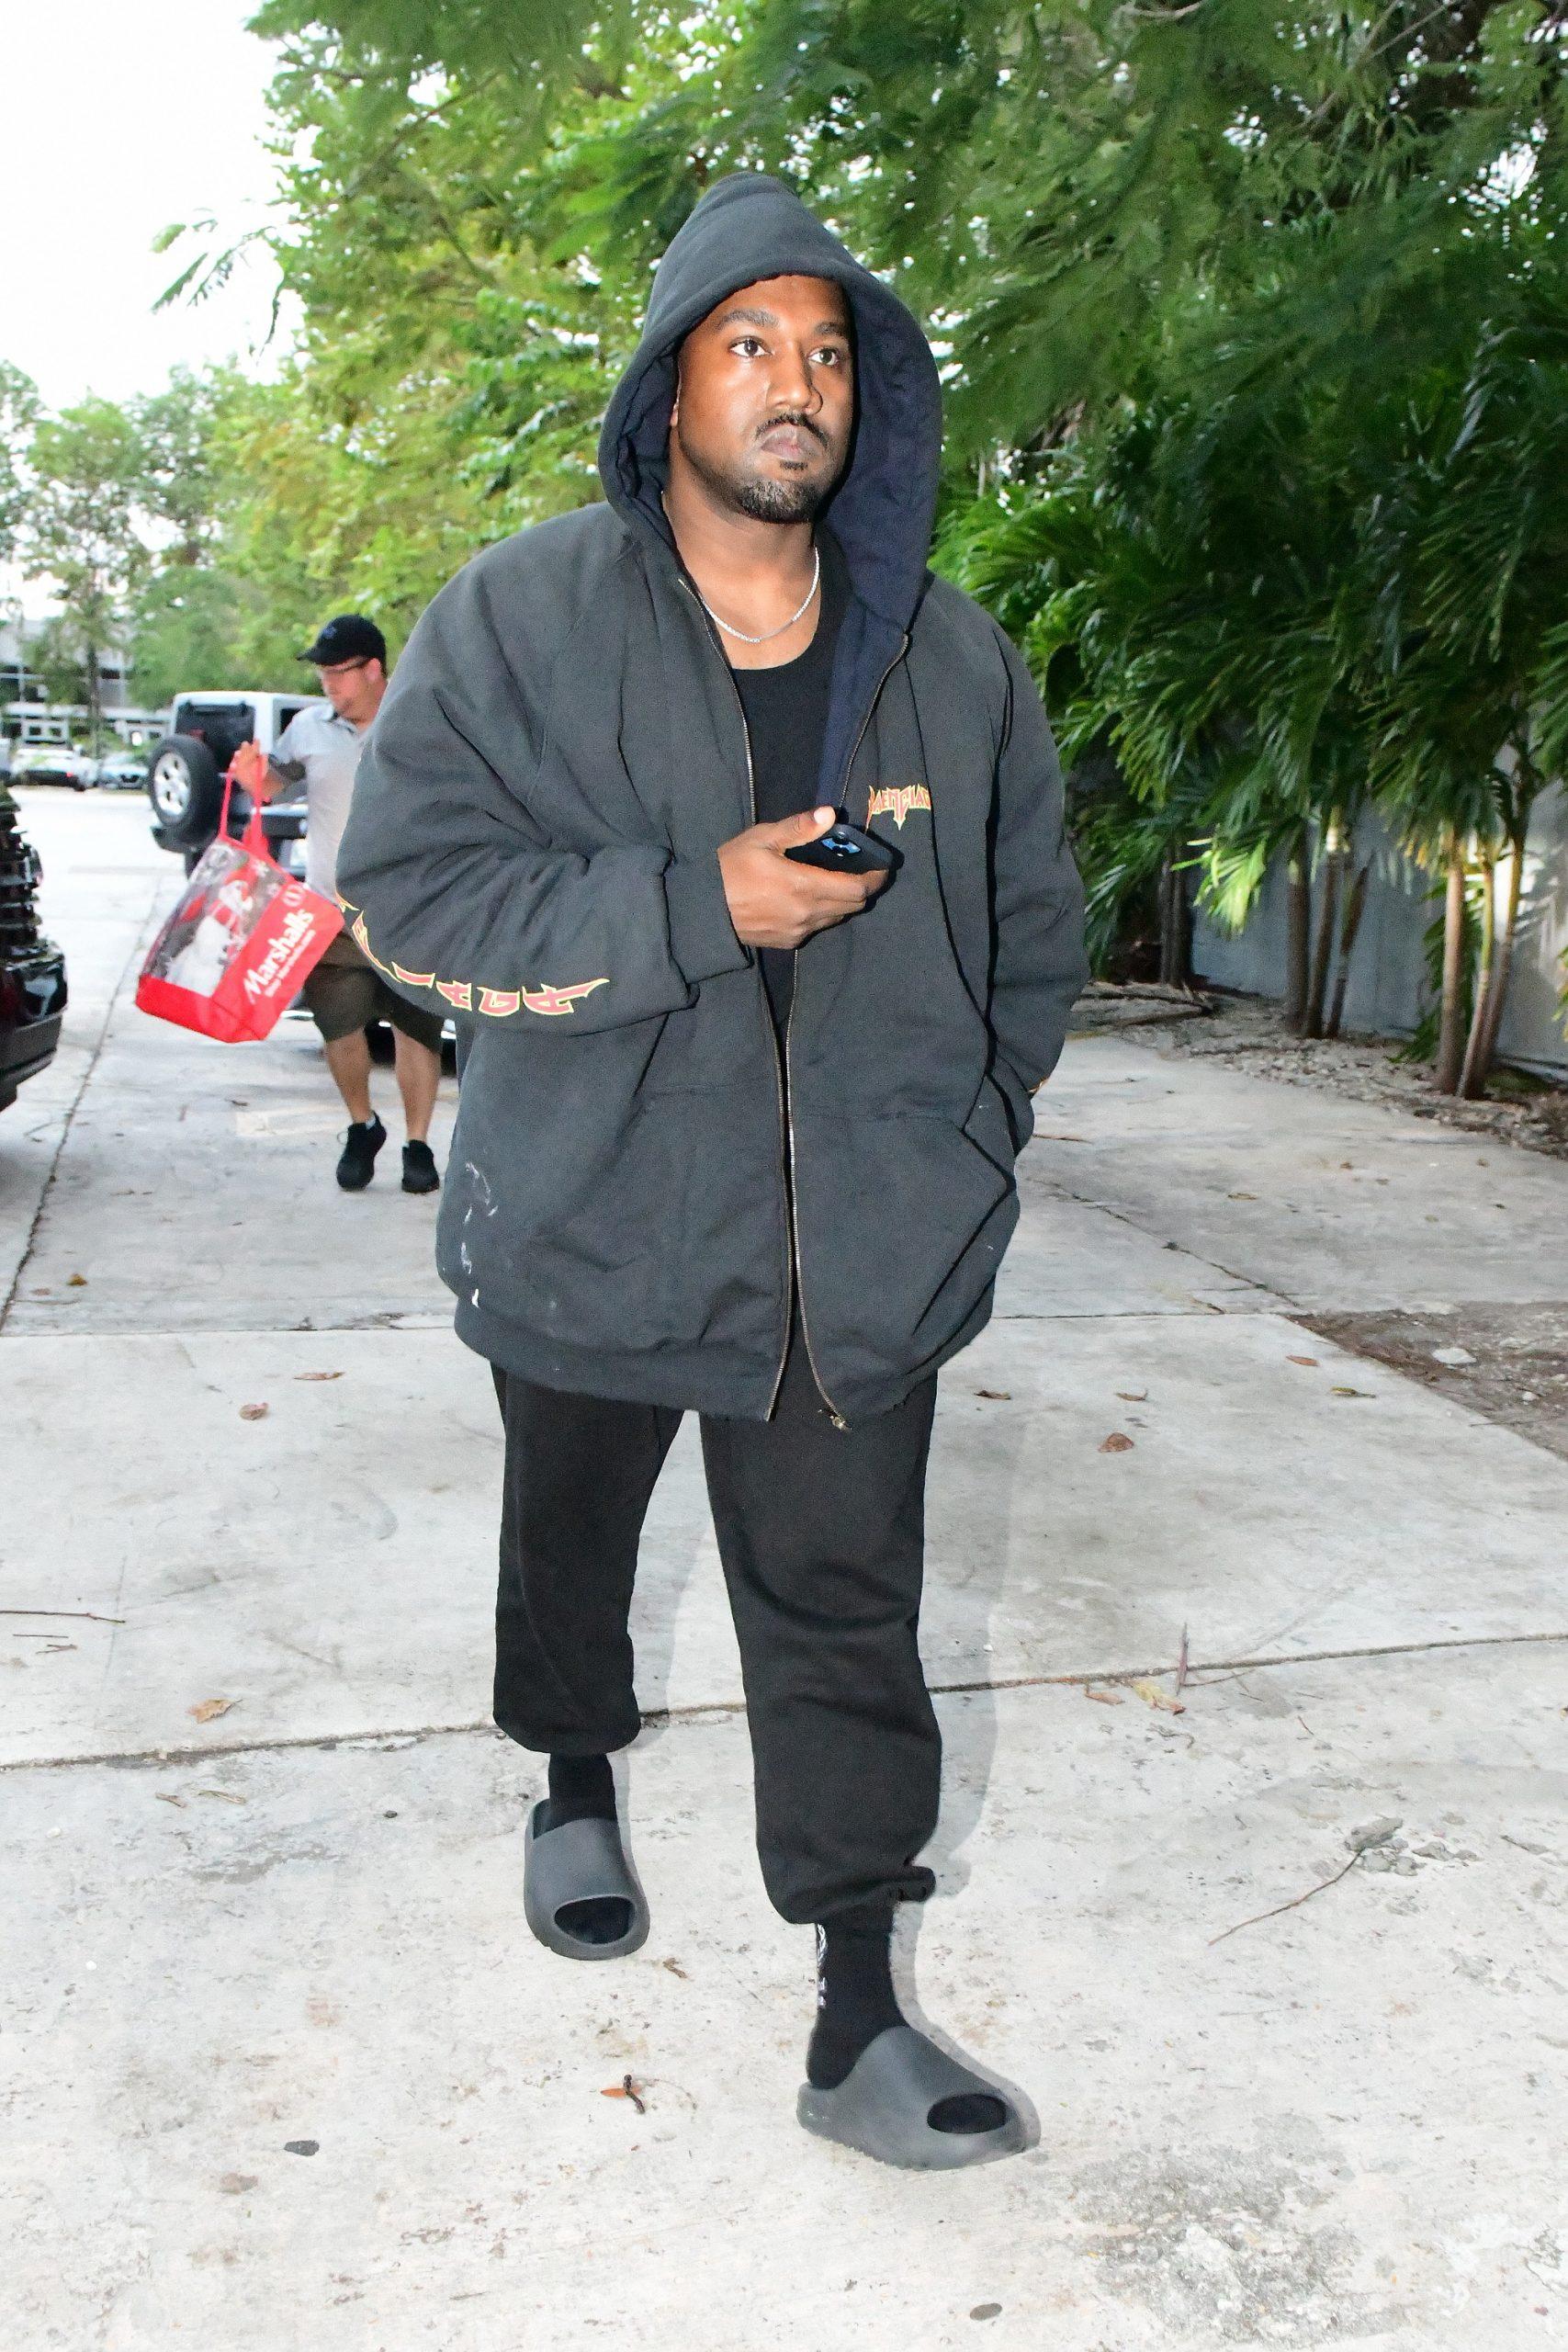 Kanye West is seen for the first time since becoming legally single as he hits up a tattoo shop in Miami